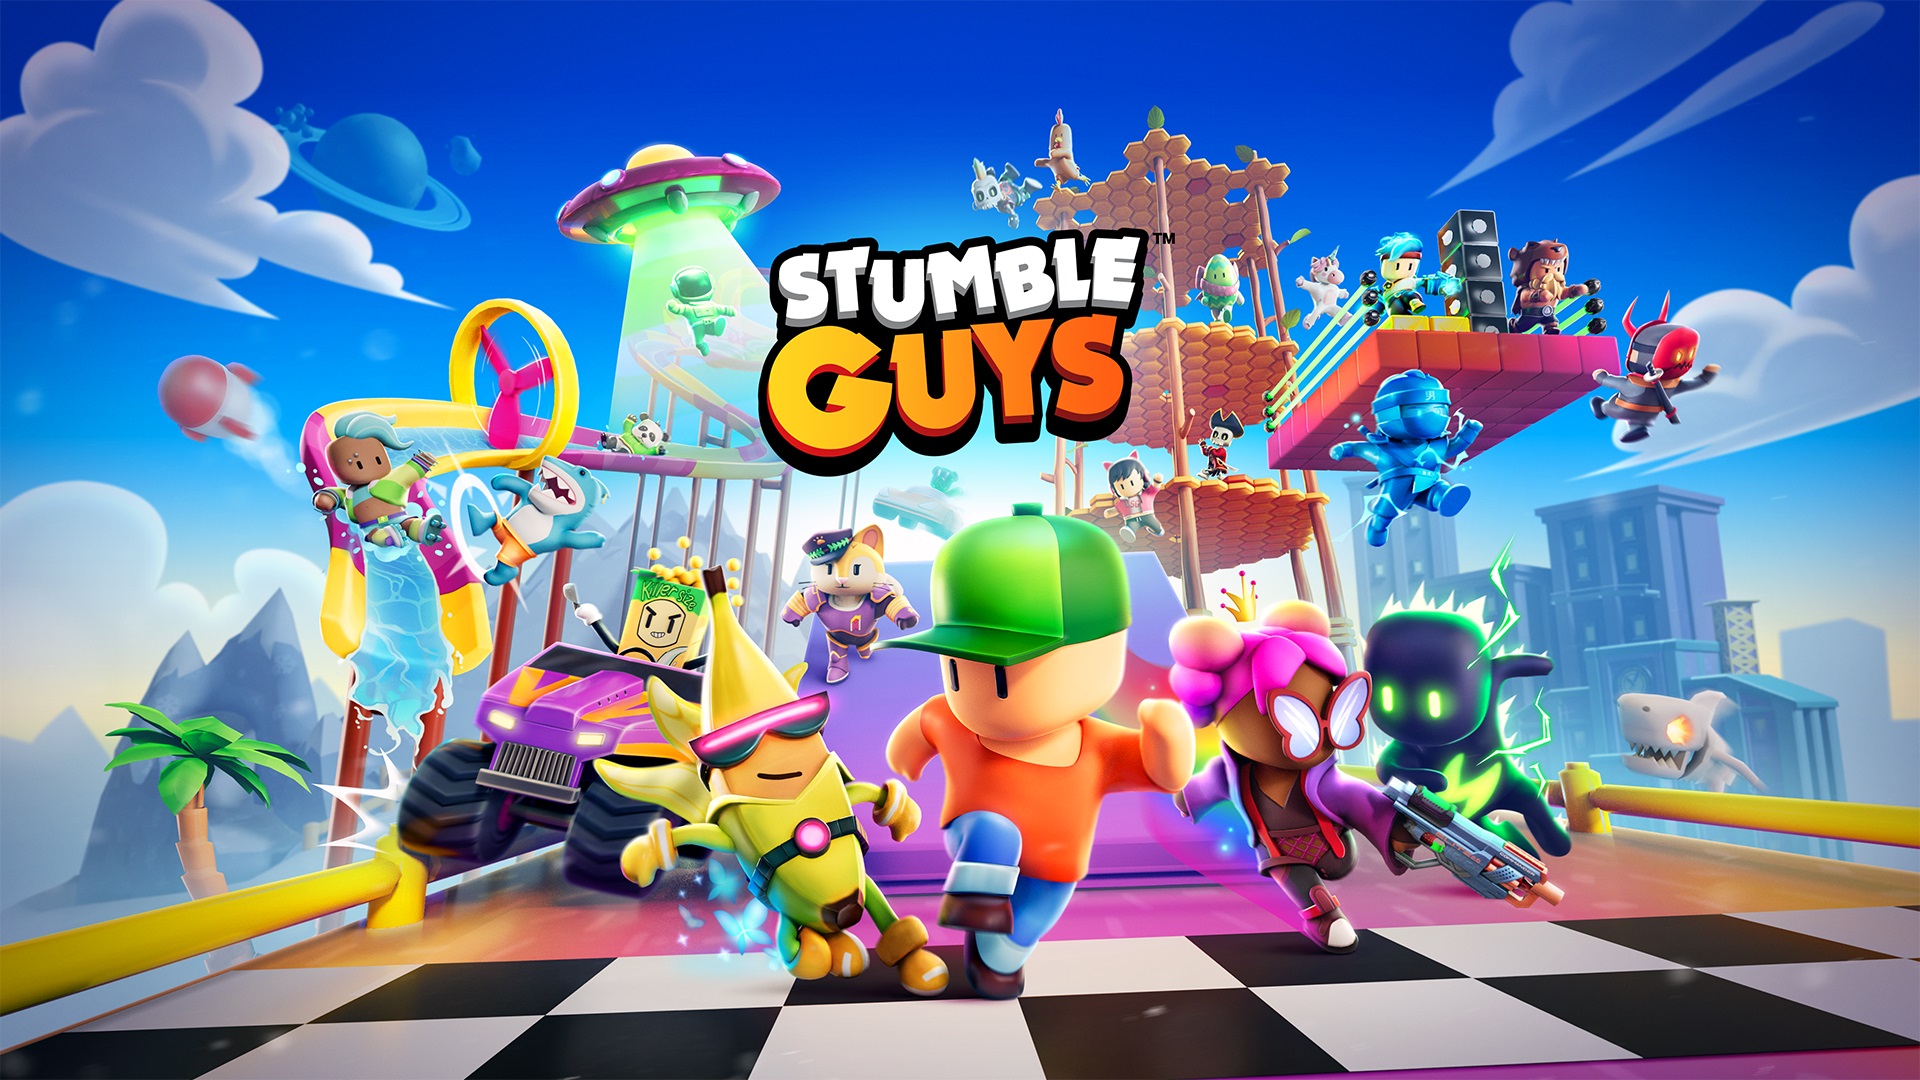 Download Stumble Guys 0.45.4 APK with Super Bowl Maps and NFL content for  Android, iOS, and Windows